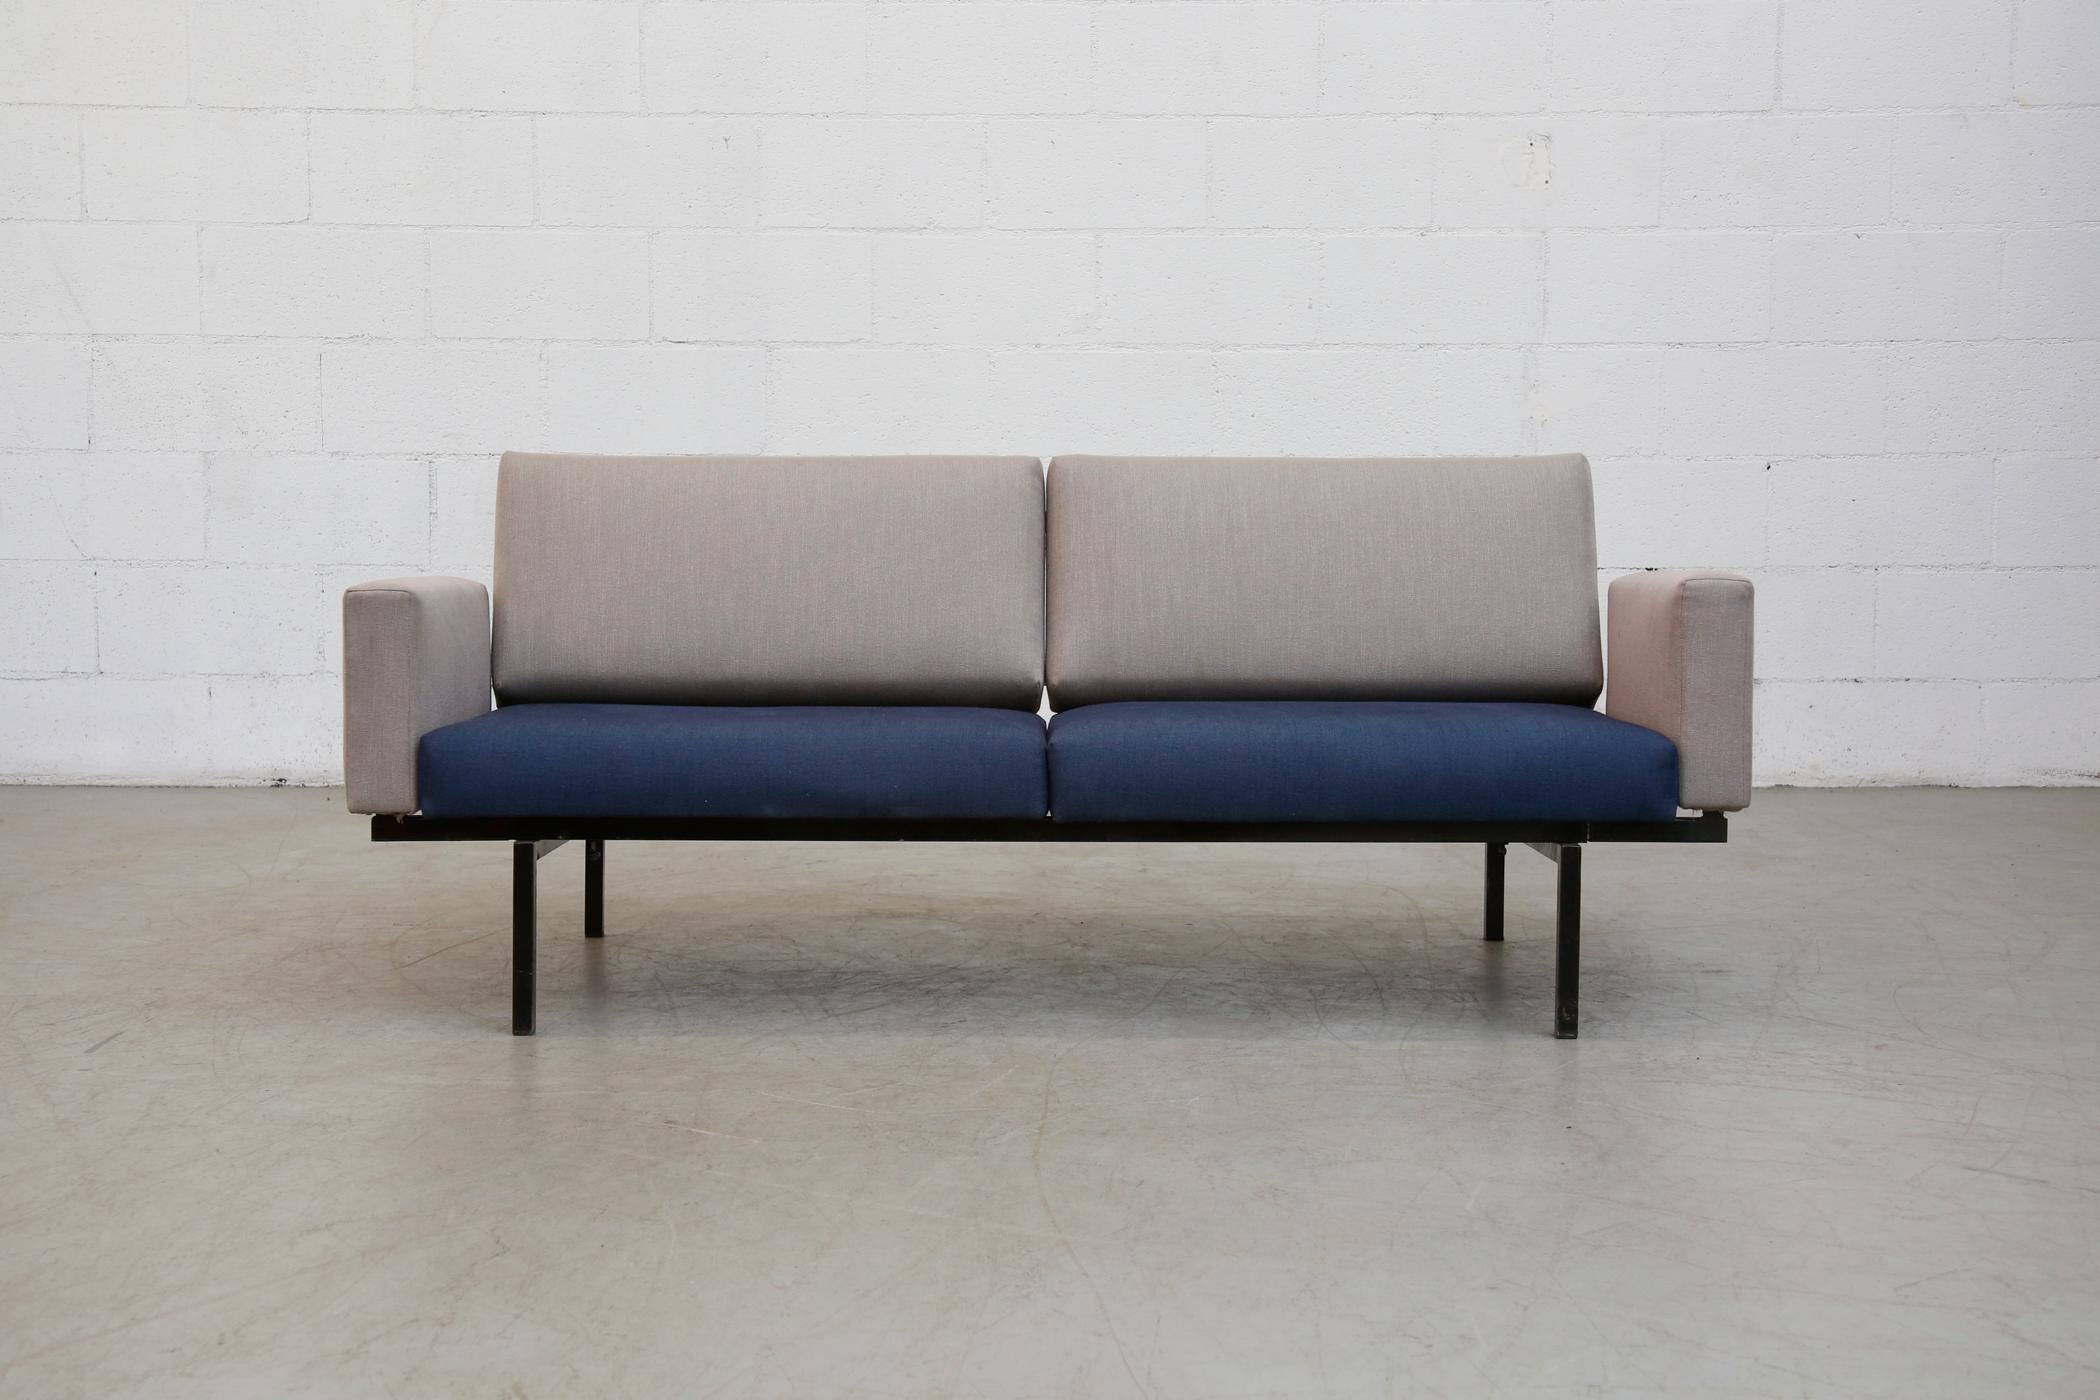 Rare conversion sofa to bed from Coen de Vries for Pilastro with arm rests. Newly upholstered in grey and indigo with black enameled metal frame. When as a daybed it measures 85 x 32.25 x 15/26.25. Other similar sofas are available and listed